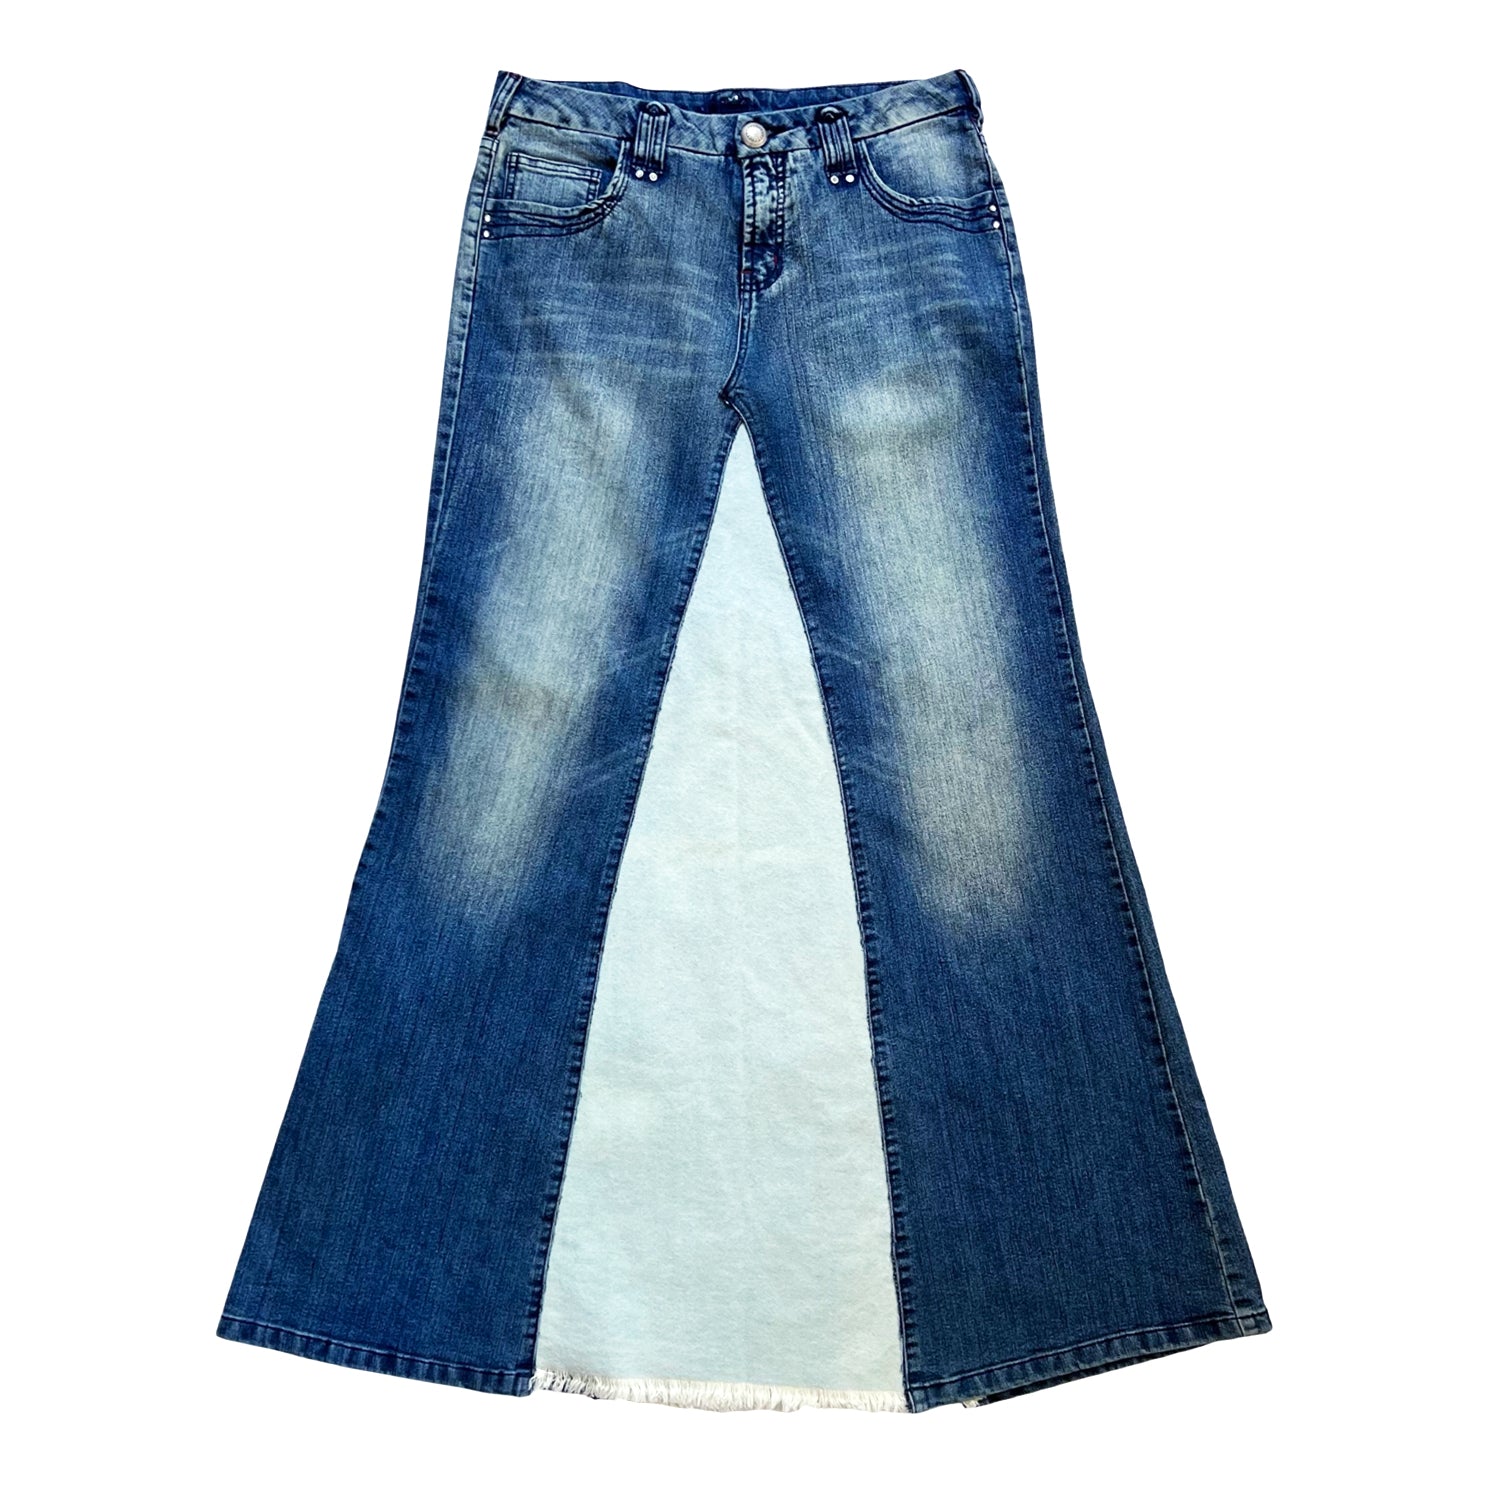 L2r The Label Women's Upcycled Skirt In Washed Blue Denim In Multi